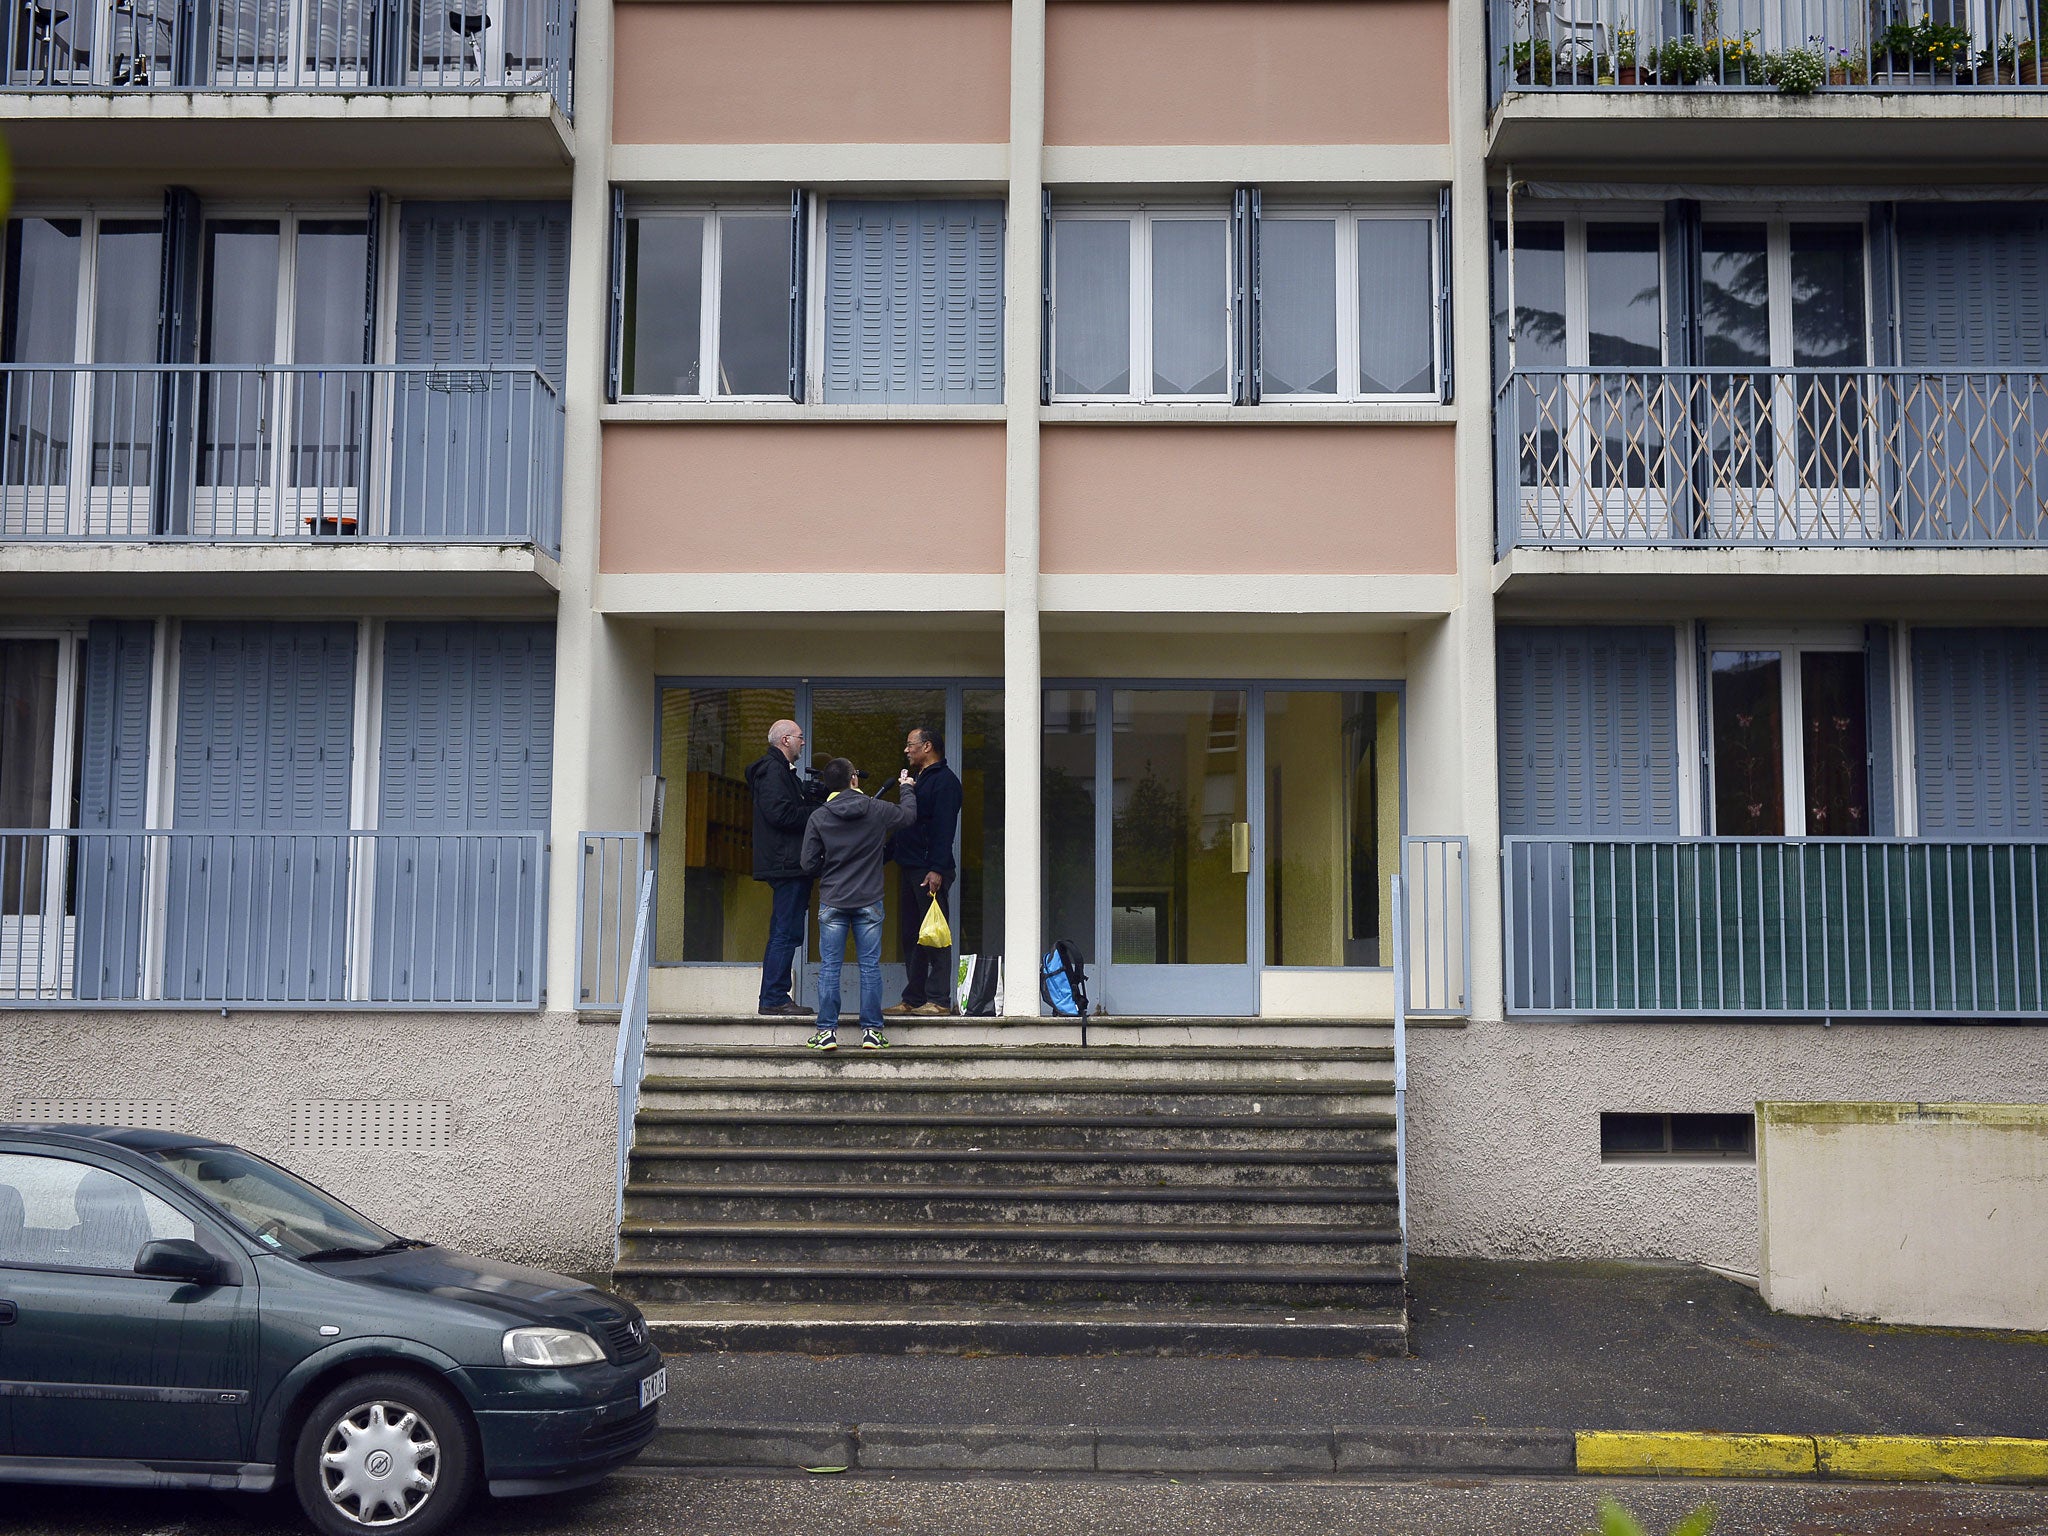 The apartment building where the bodies of two children, aged 5 and 10, were discovered